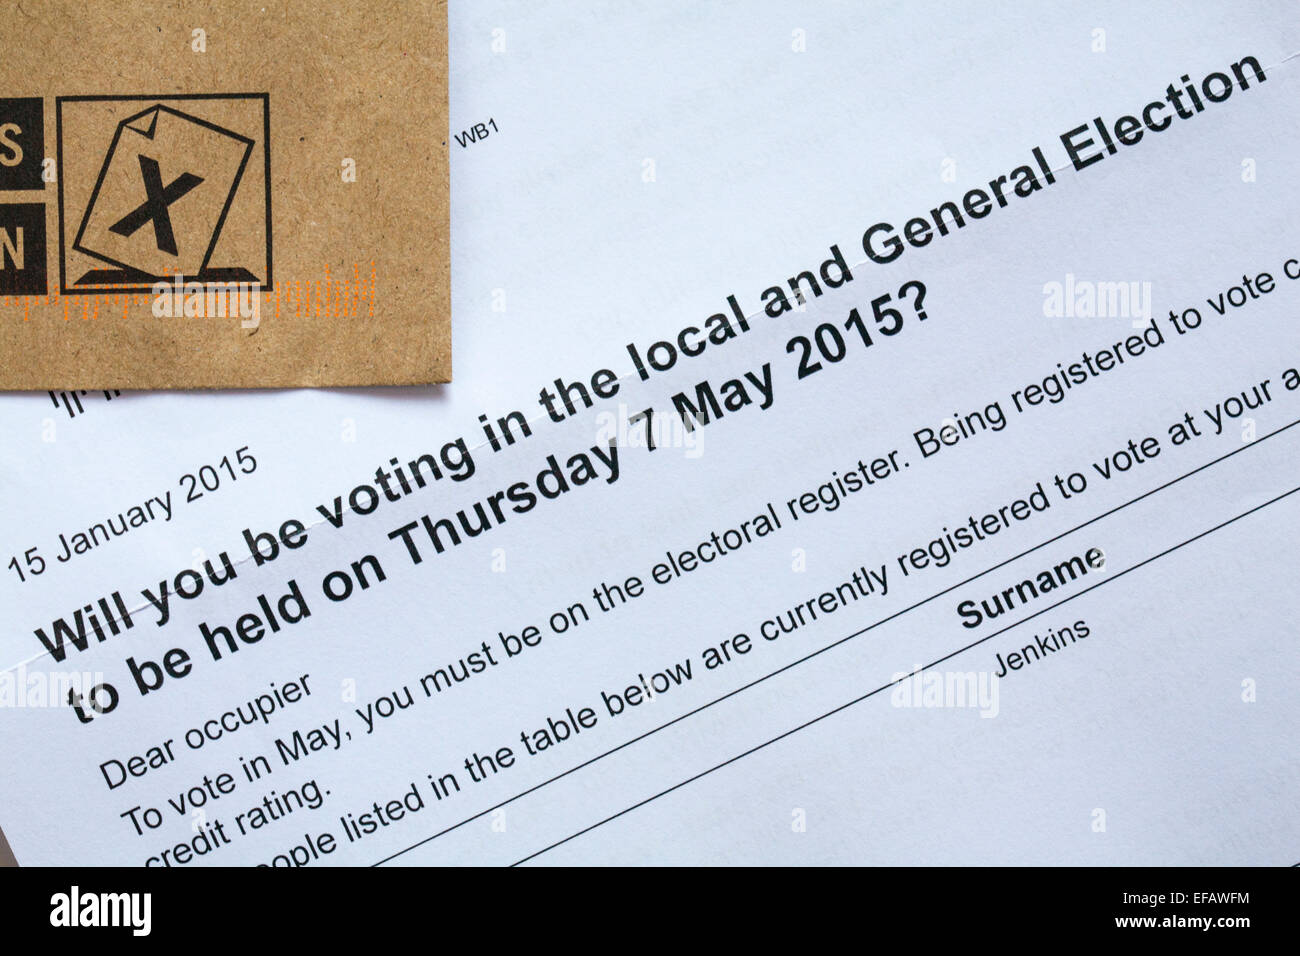 Will you be voting in the local and General Election to be held on Thursday 7 May 2015 - letter from Bournemouth Borough Council Stock Photo